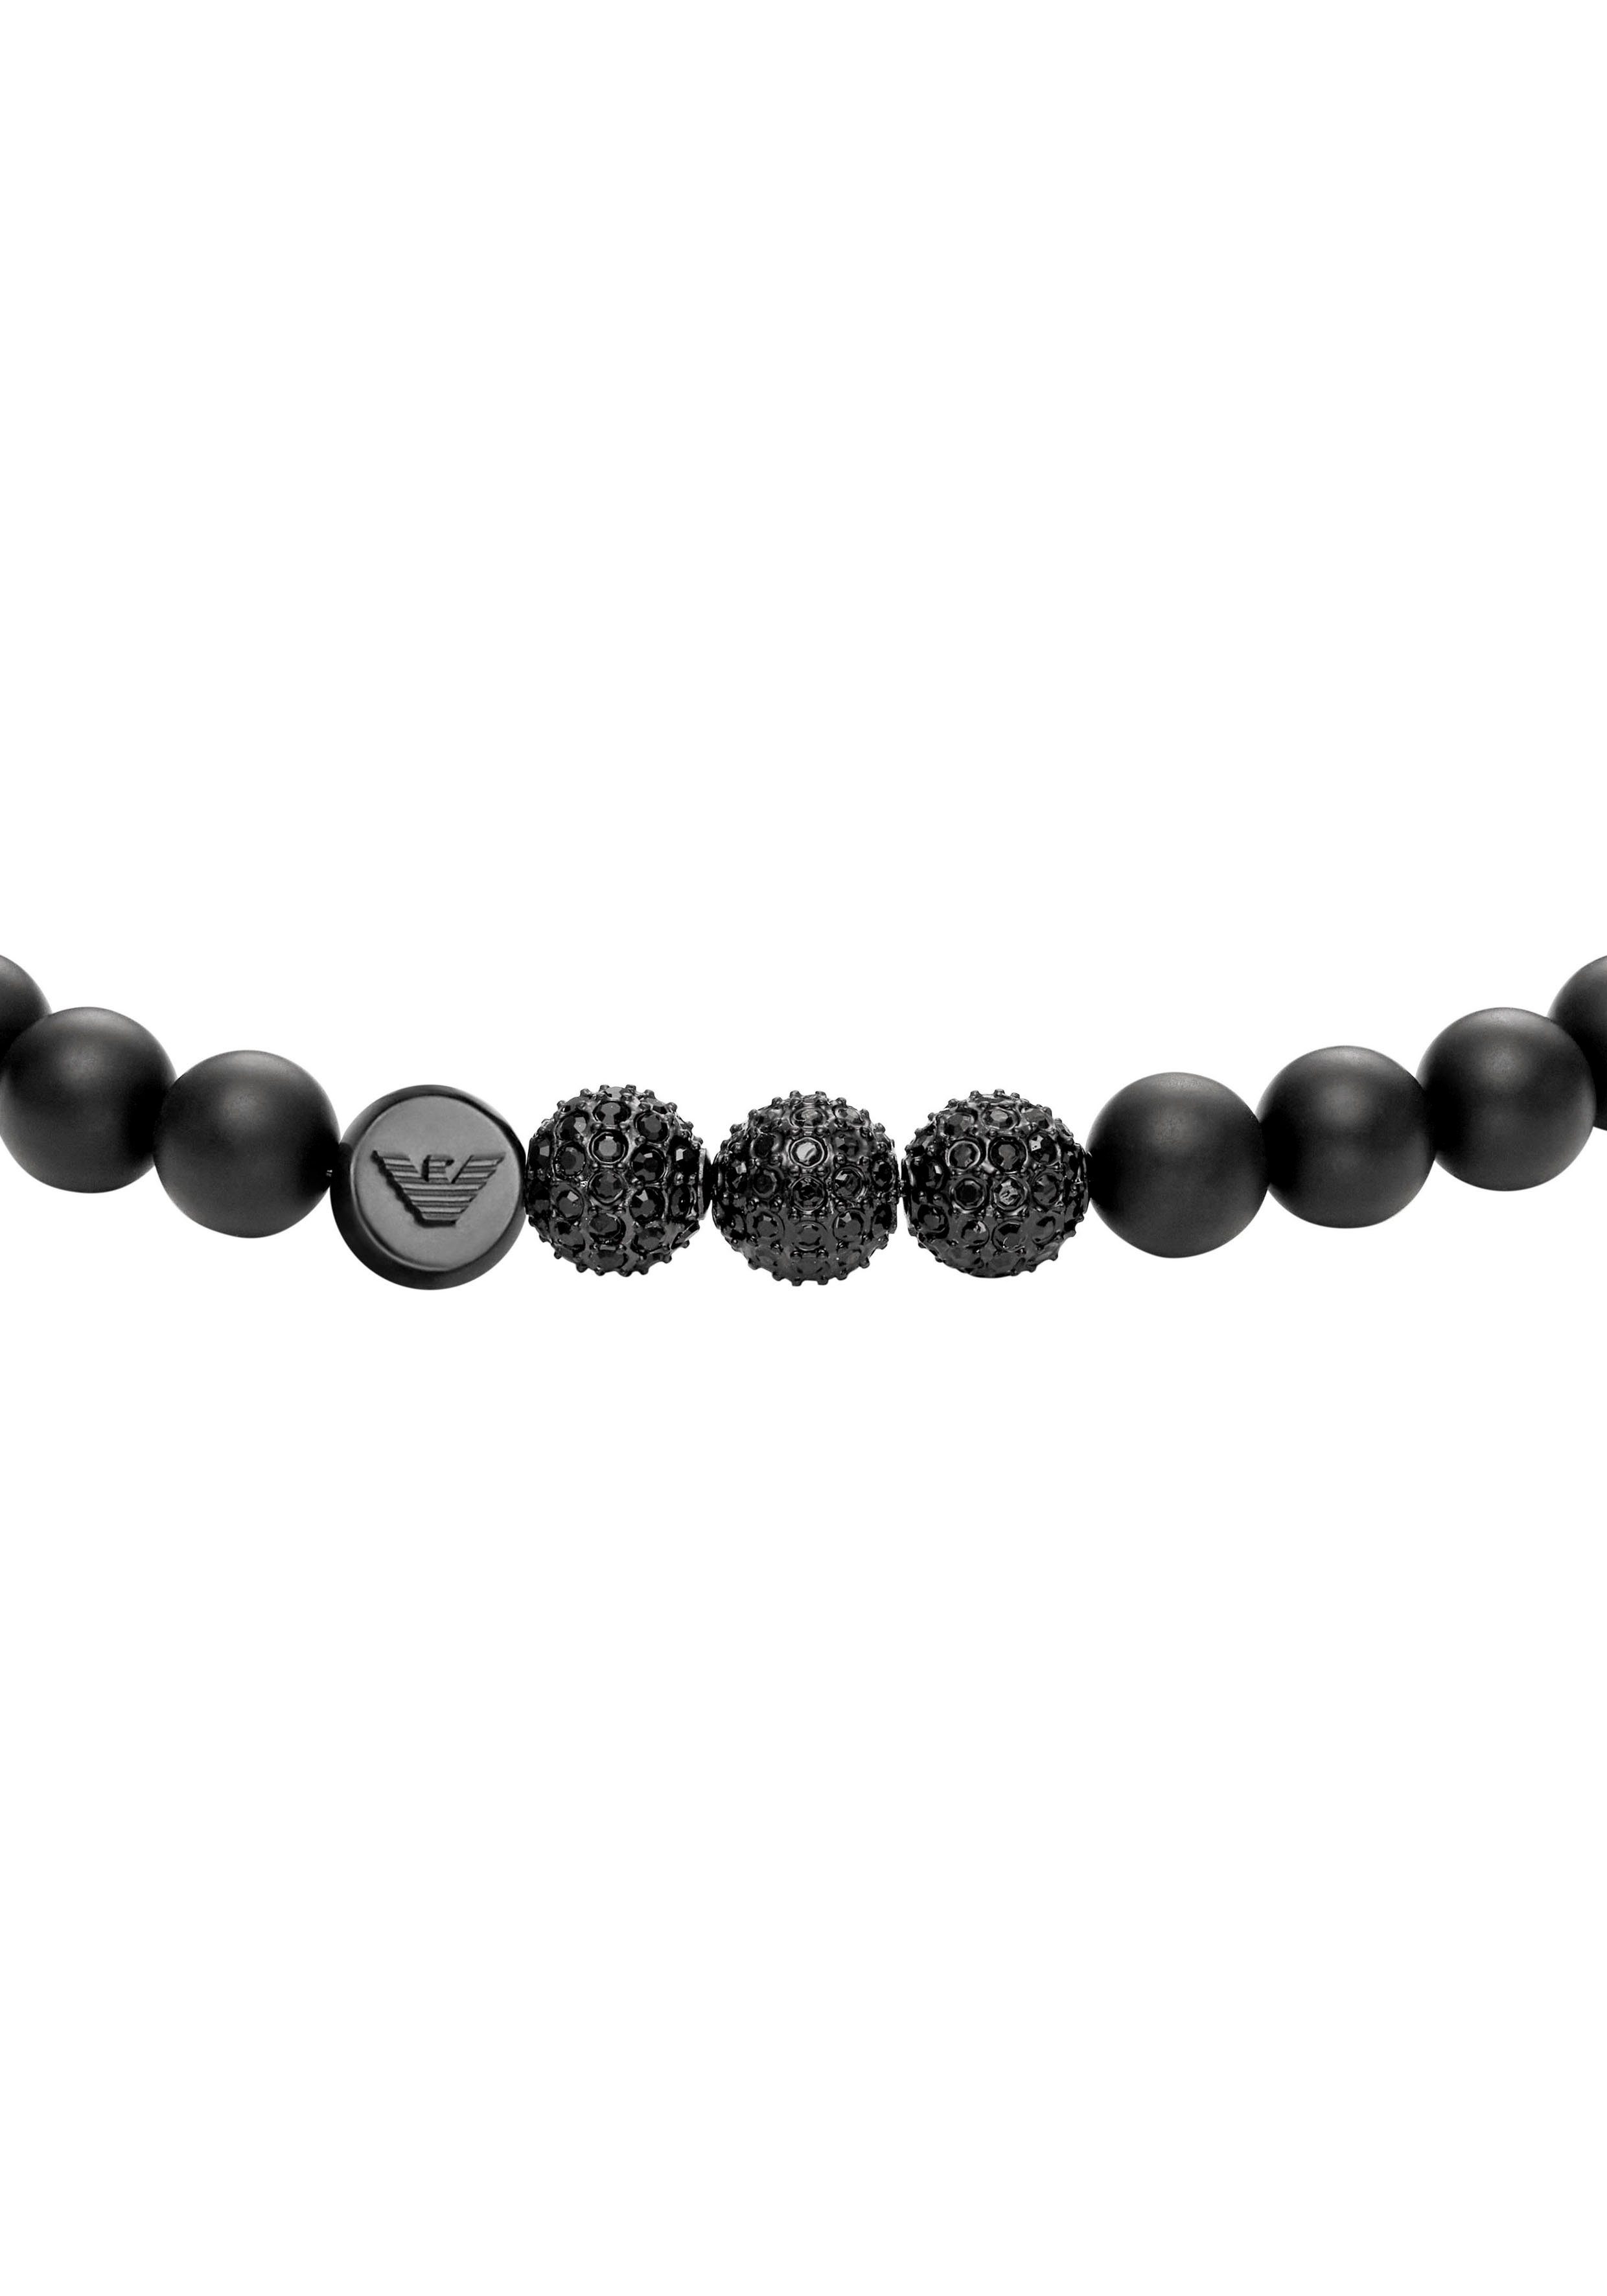 und TREND, Onyx Gagat ICONIC Emporio BEADS mit EGS3030001, Armani Armband AND PAVE,